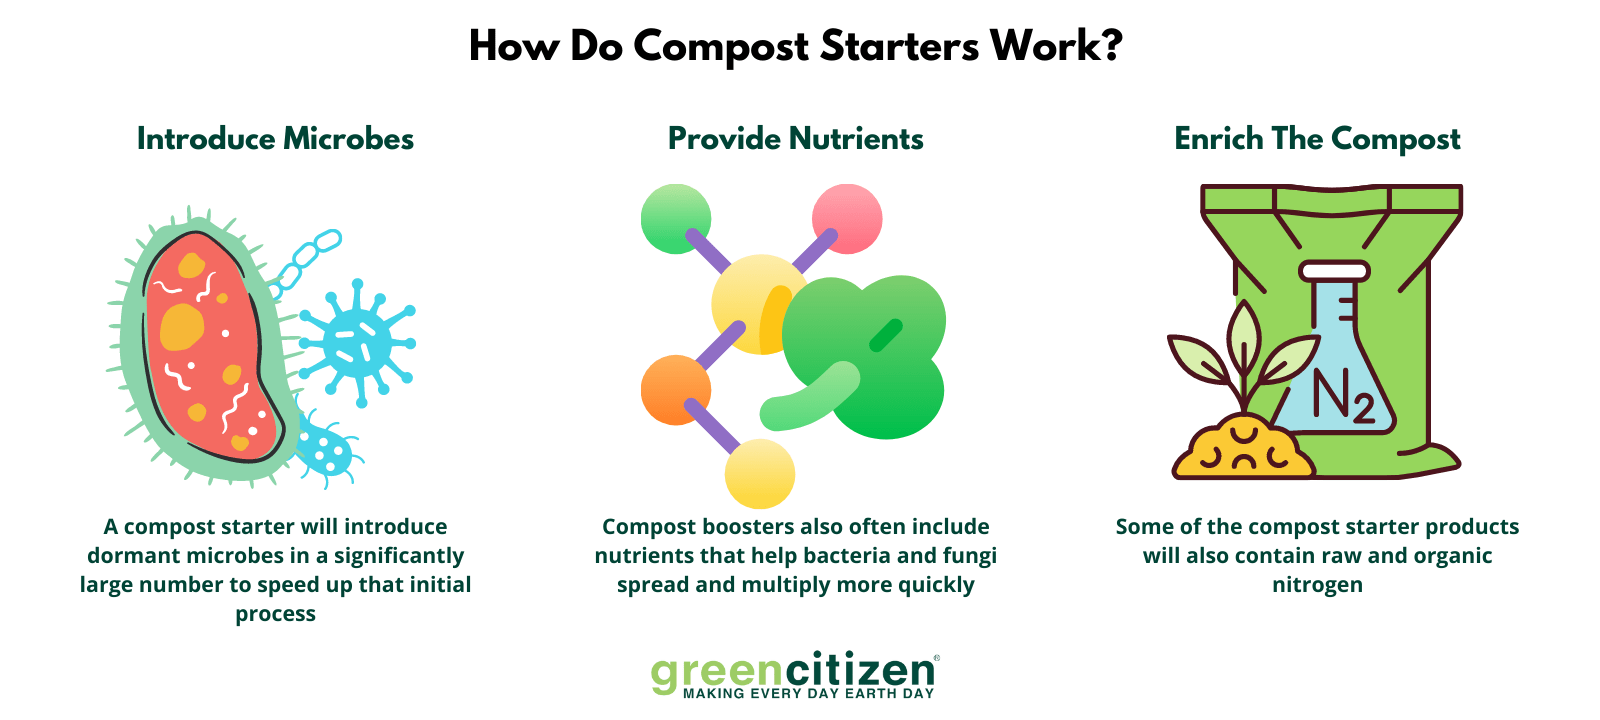 How Do Compost Starters Work